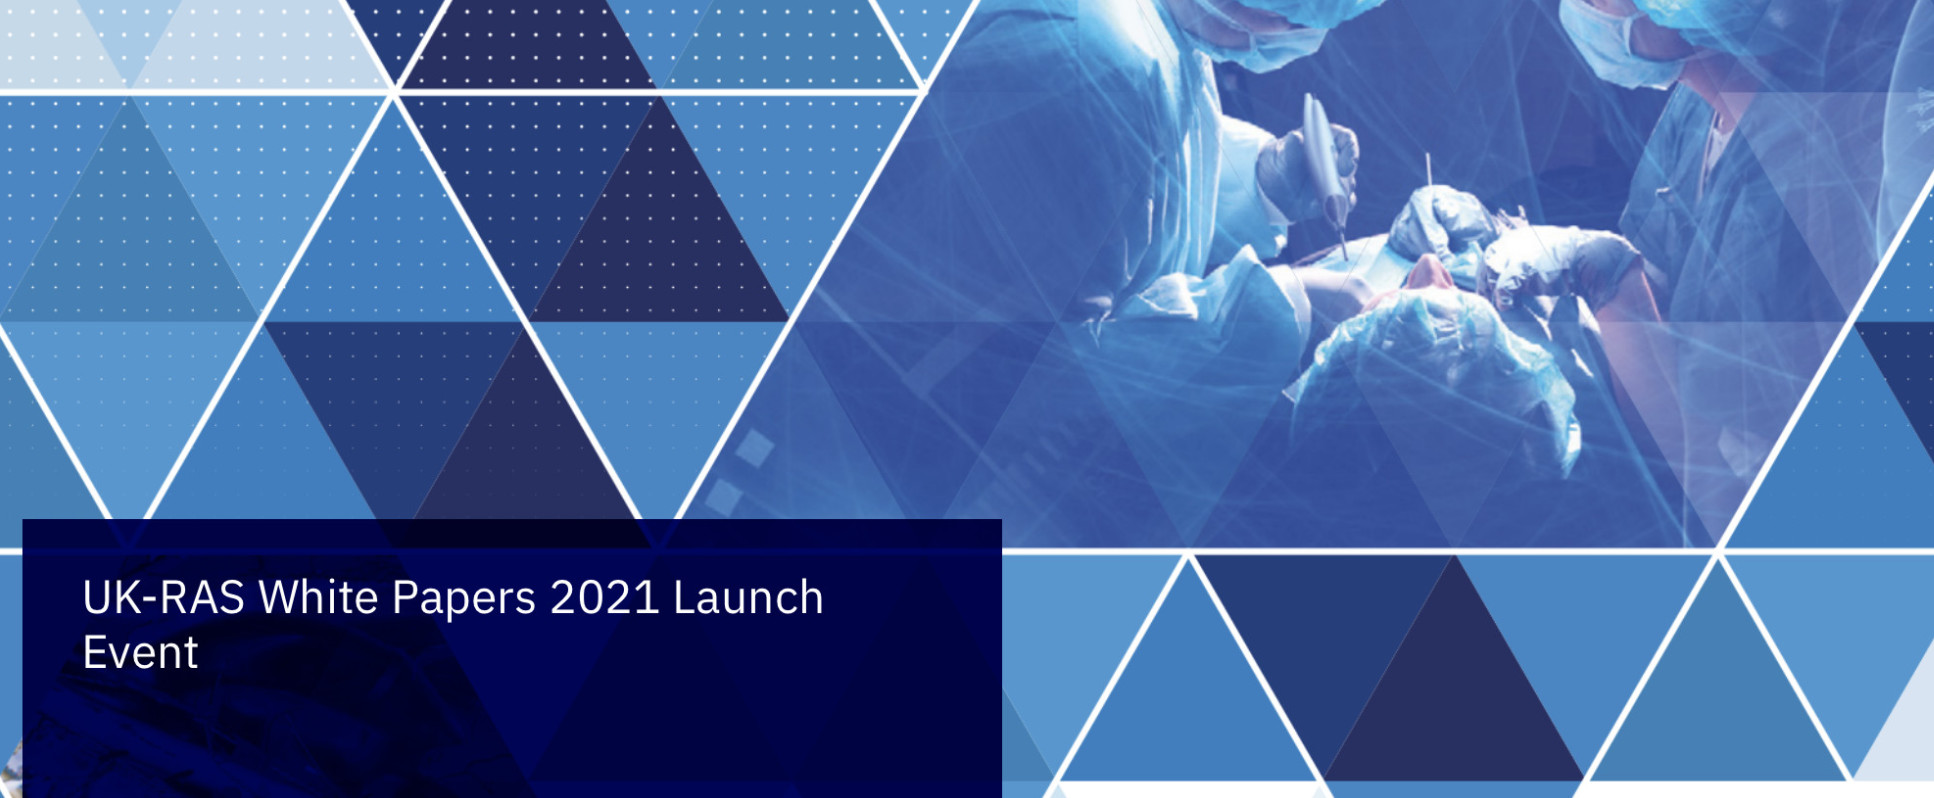 HSMR21- UK-RAS White Papers 2021 Launch Event